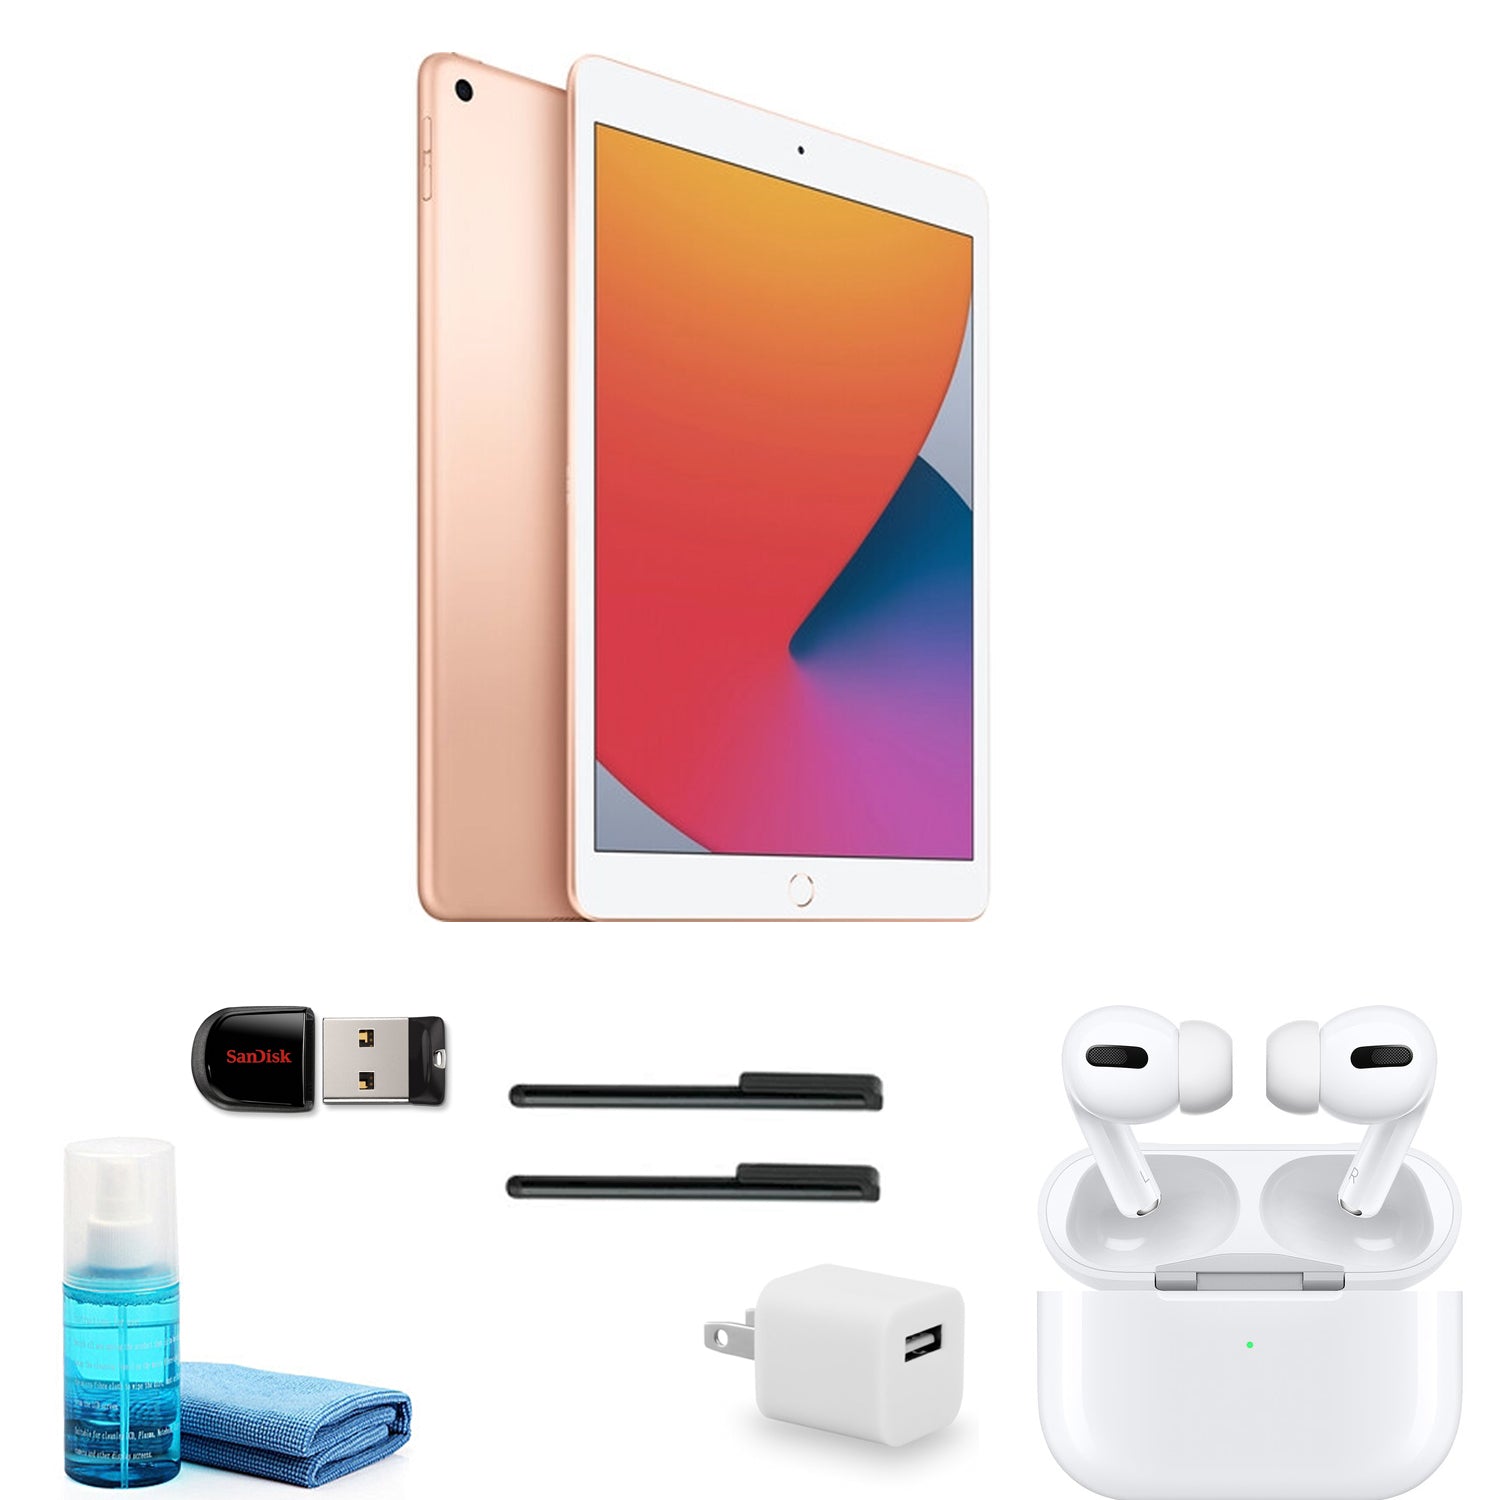 Apple iPad 10.2 Inch (128GB, Gold, MYLF2LL/A) with Apple AirPods Pro and more